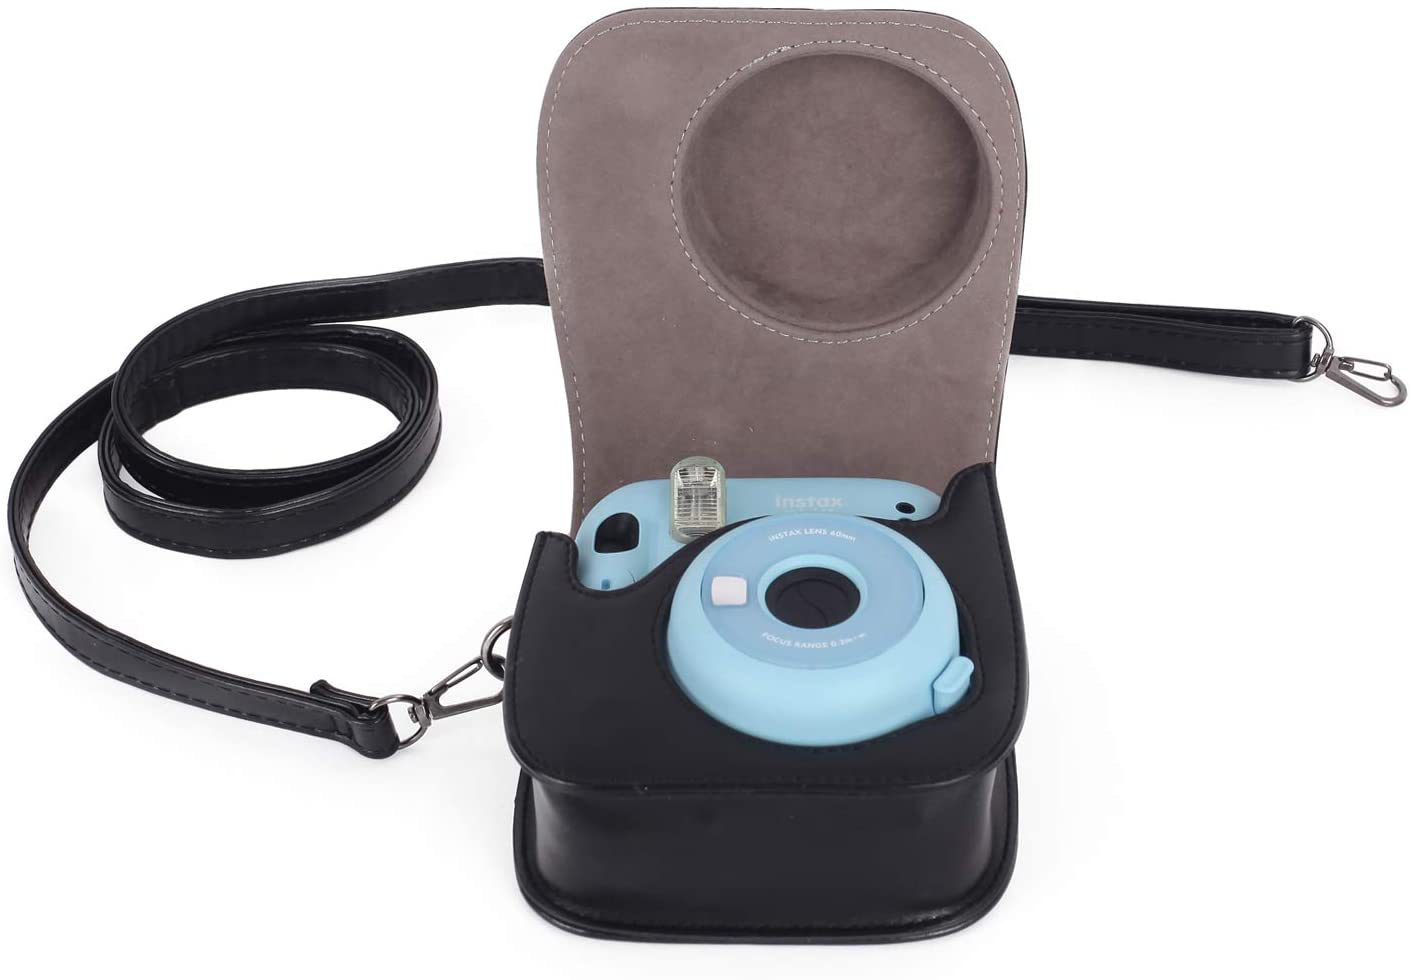 Phetium Instant Camera Case Compatible with Instax Mini 11,PU Leather Bag with Pocket and Adjustable Shoulder Strap